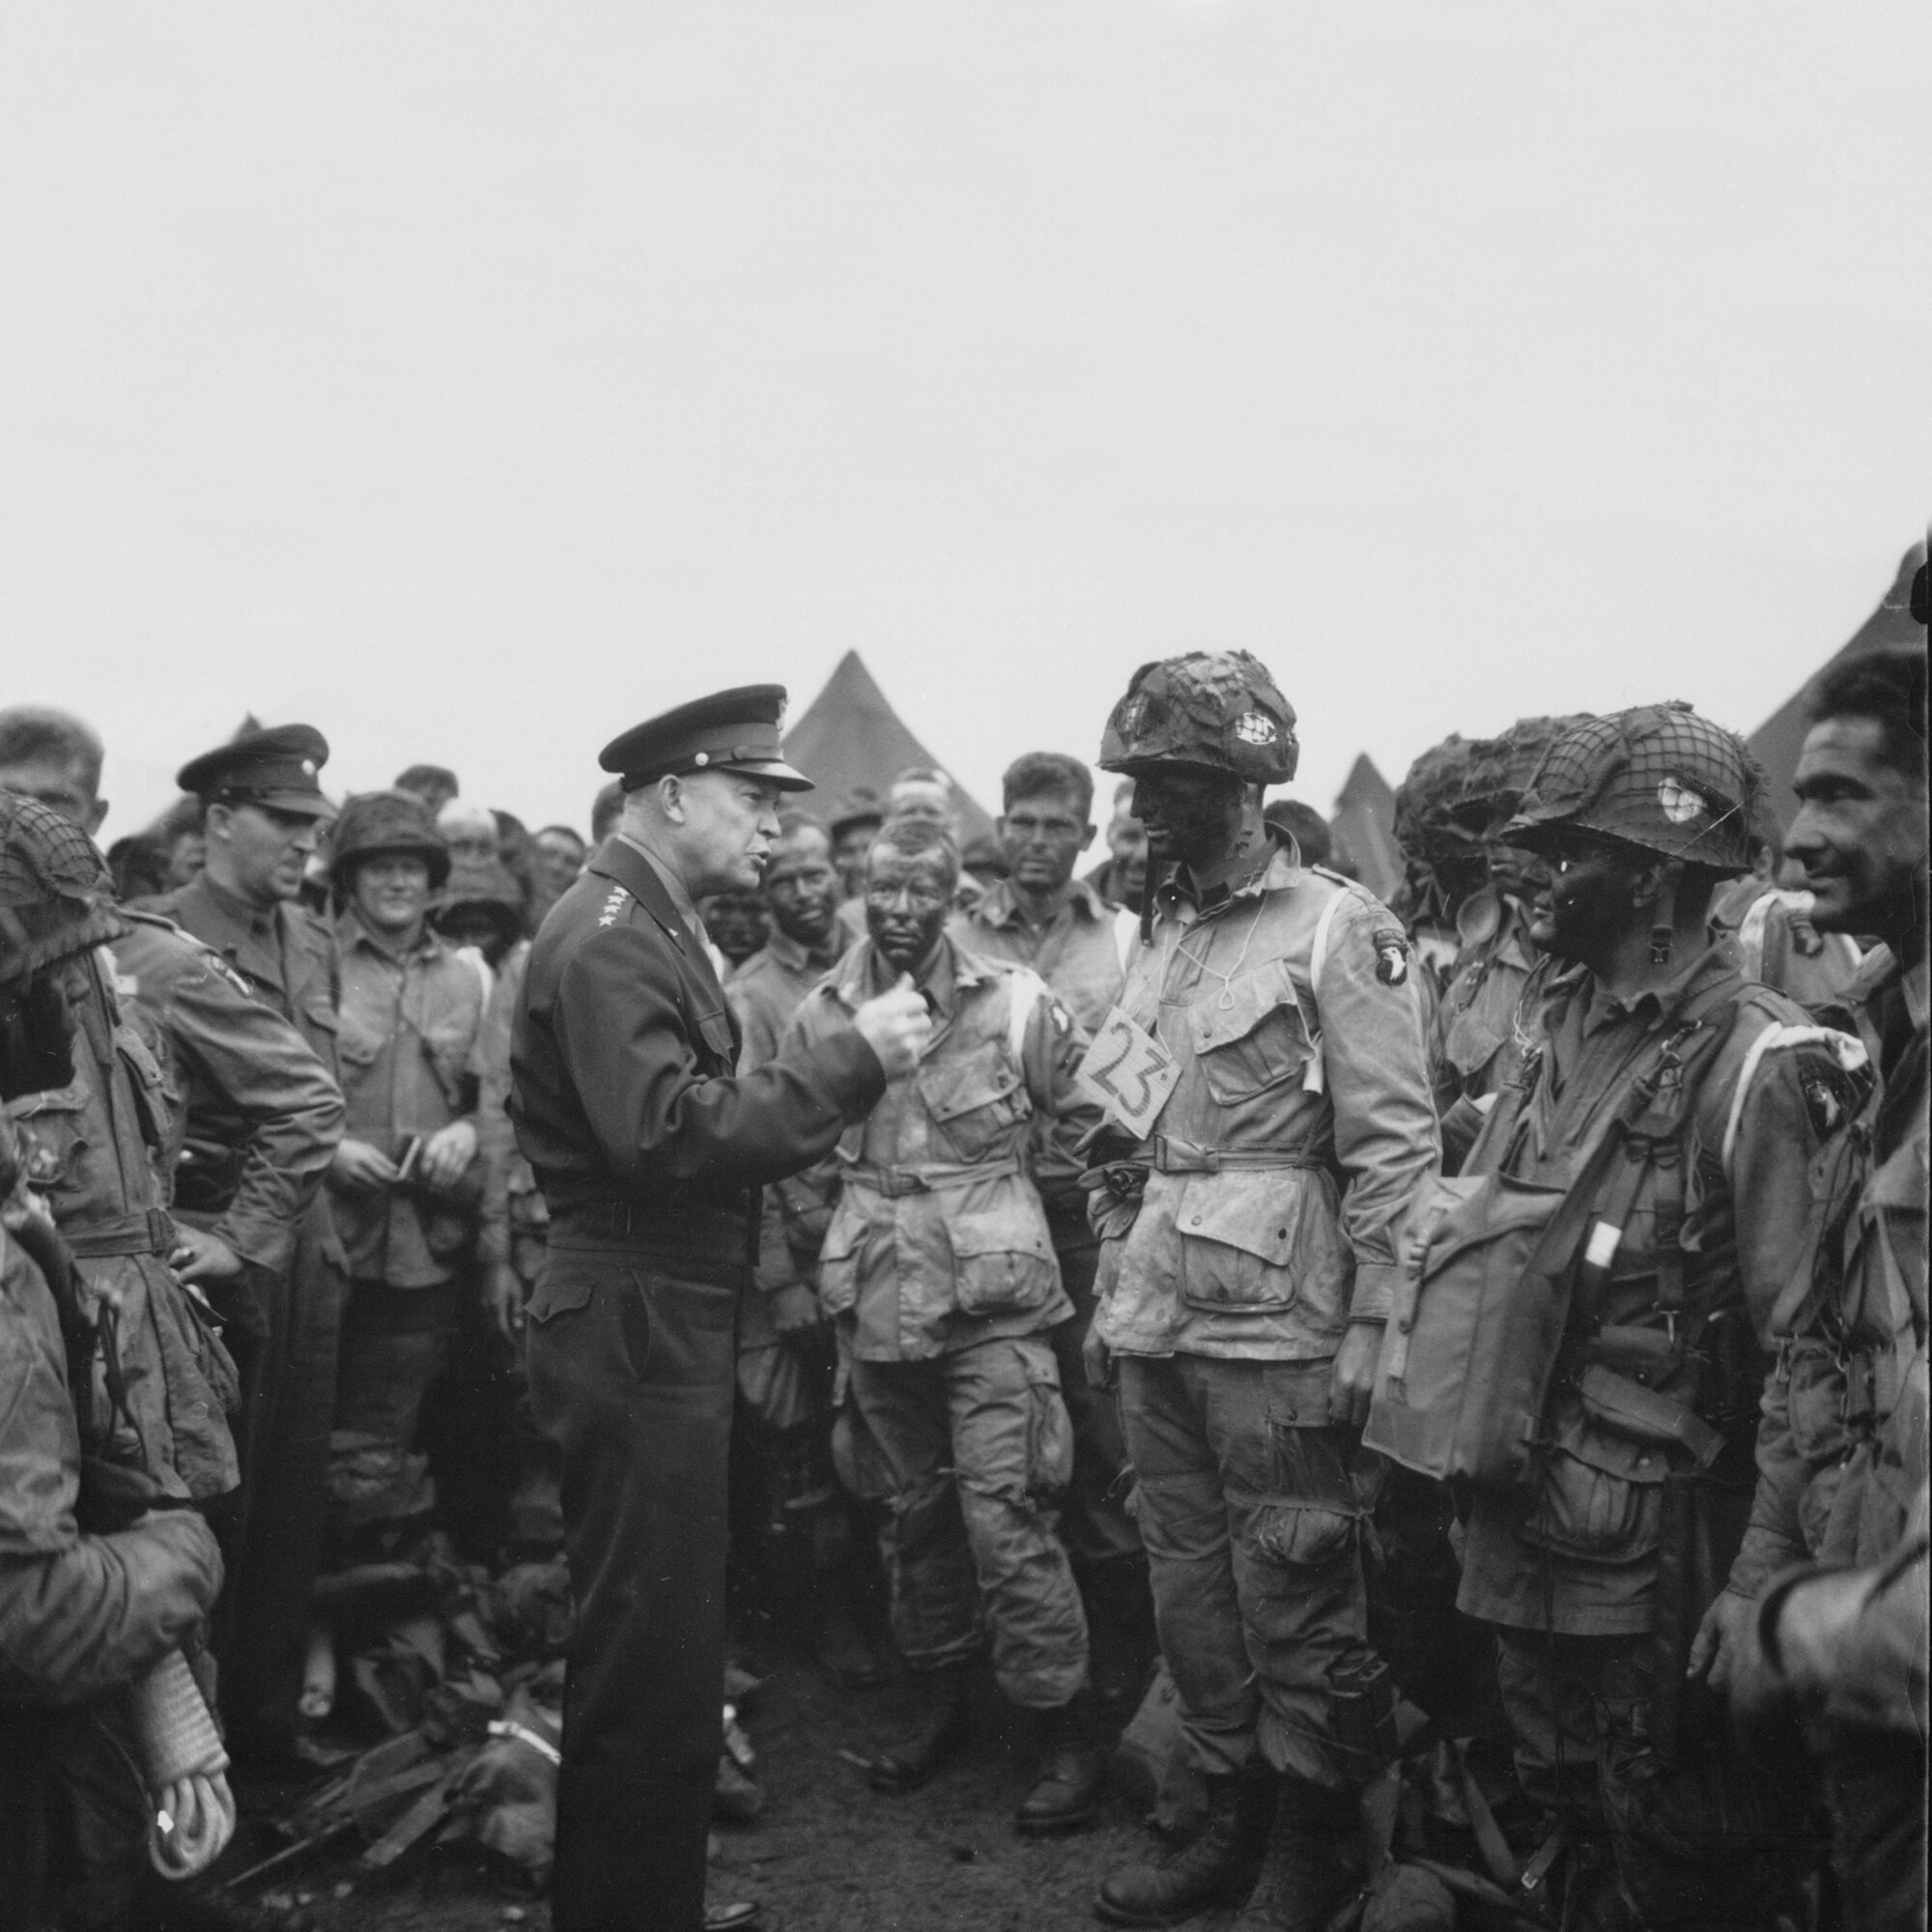 General Dwight D. Eisenhower, the Supreme Allied Commander in charge of all forces involved in the Normandy landing, speaks to paratroopers of the 101st Airborne Division on the eve of D-day, 5 June 1944.